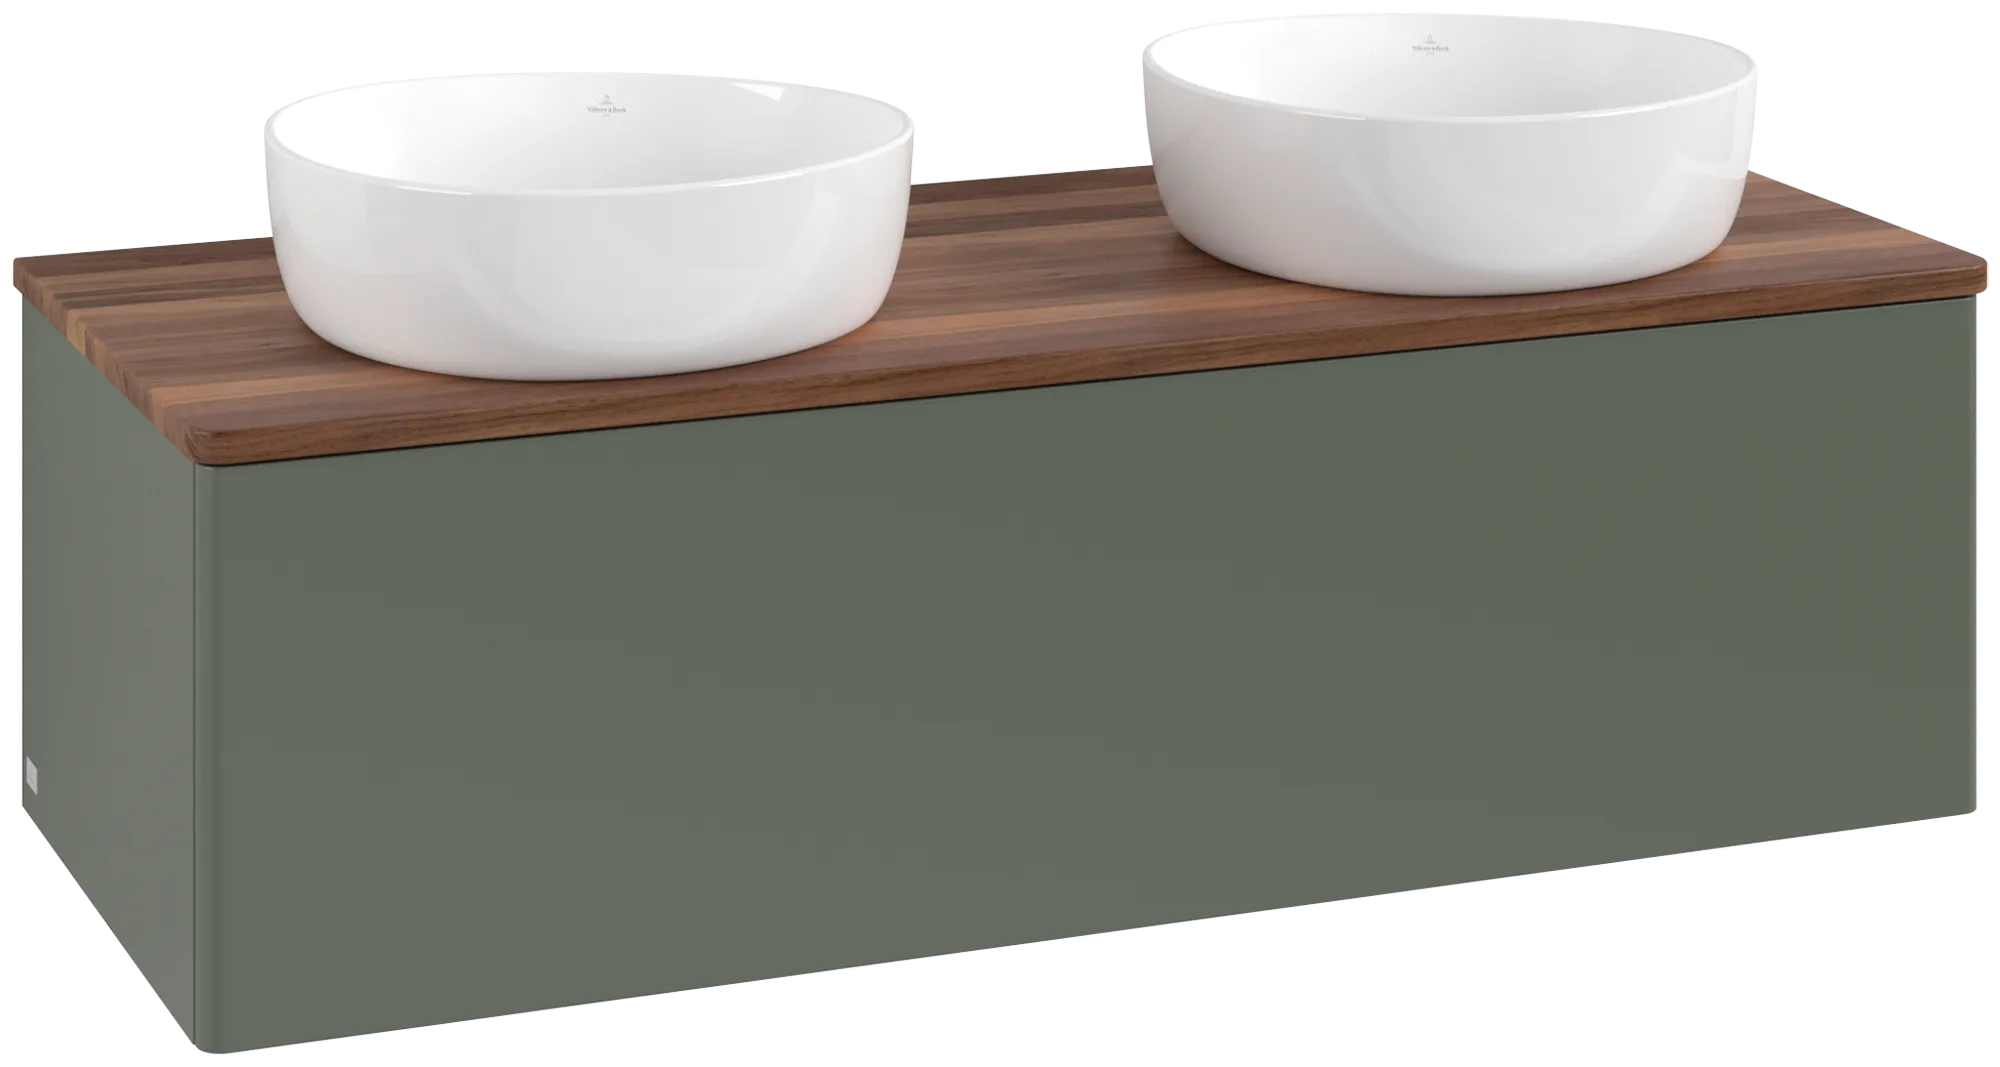 VILLEROY BOCH Antao Vanity unit, with lighting, 1 pull-out compartment, 1200 x 360 x 500 mm, Front without structure, Leaf Green Matt Lacquer / Warm Walnut #L35012HL resmi